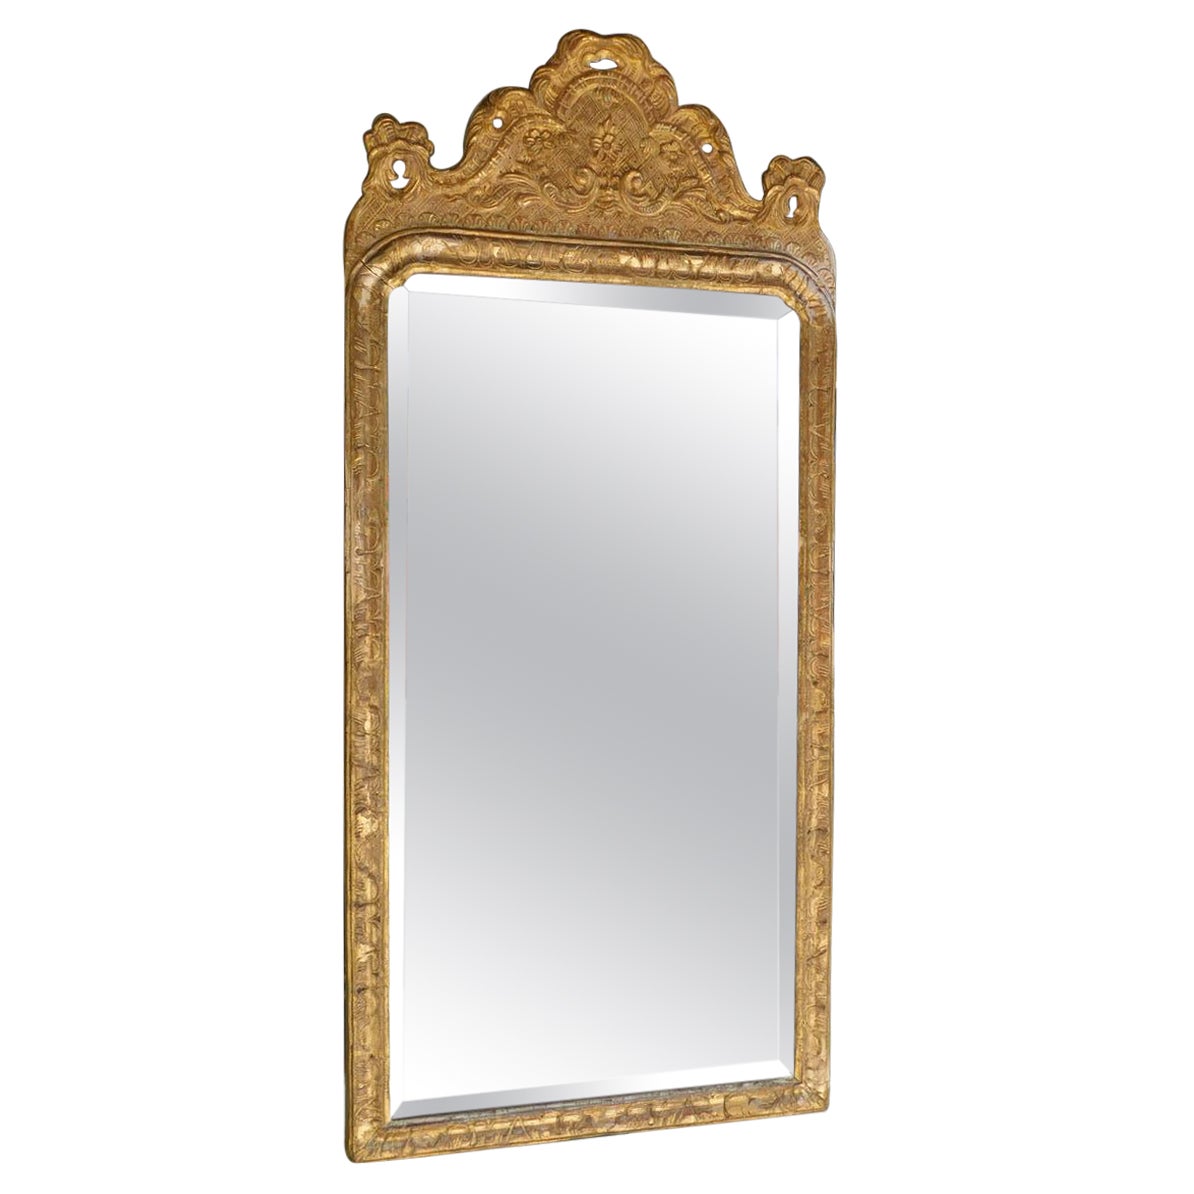 English Queen Anne Gilt Wood and Gesso Wall Mirror with Original Glass, C. 1750 For Sale